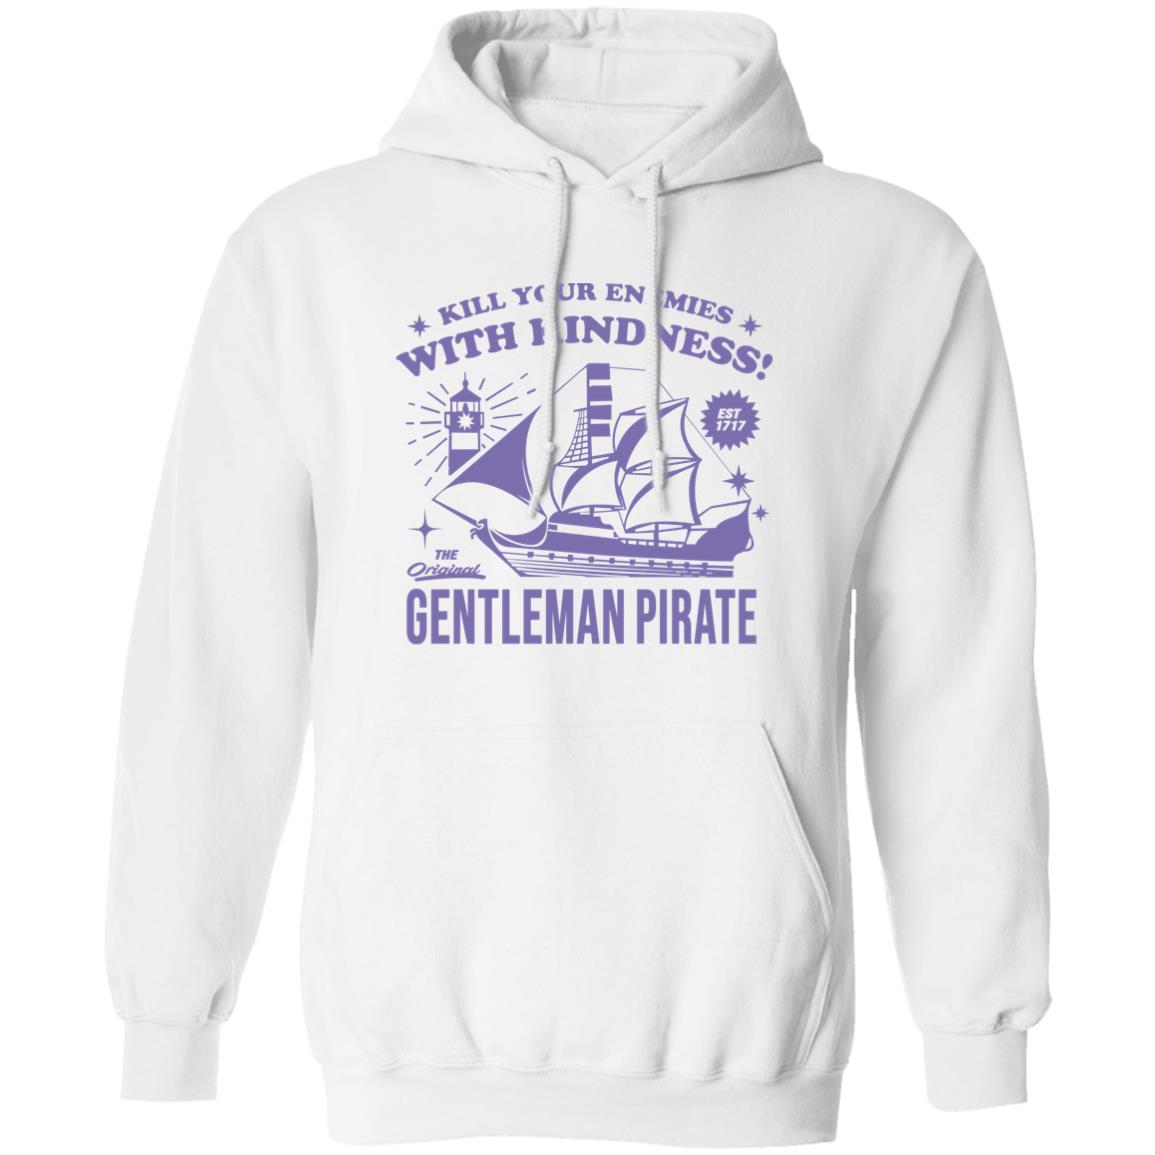 Kill Your Enemies With Kindness Gentleman Pirate Shirt 1